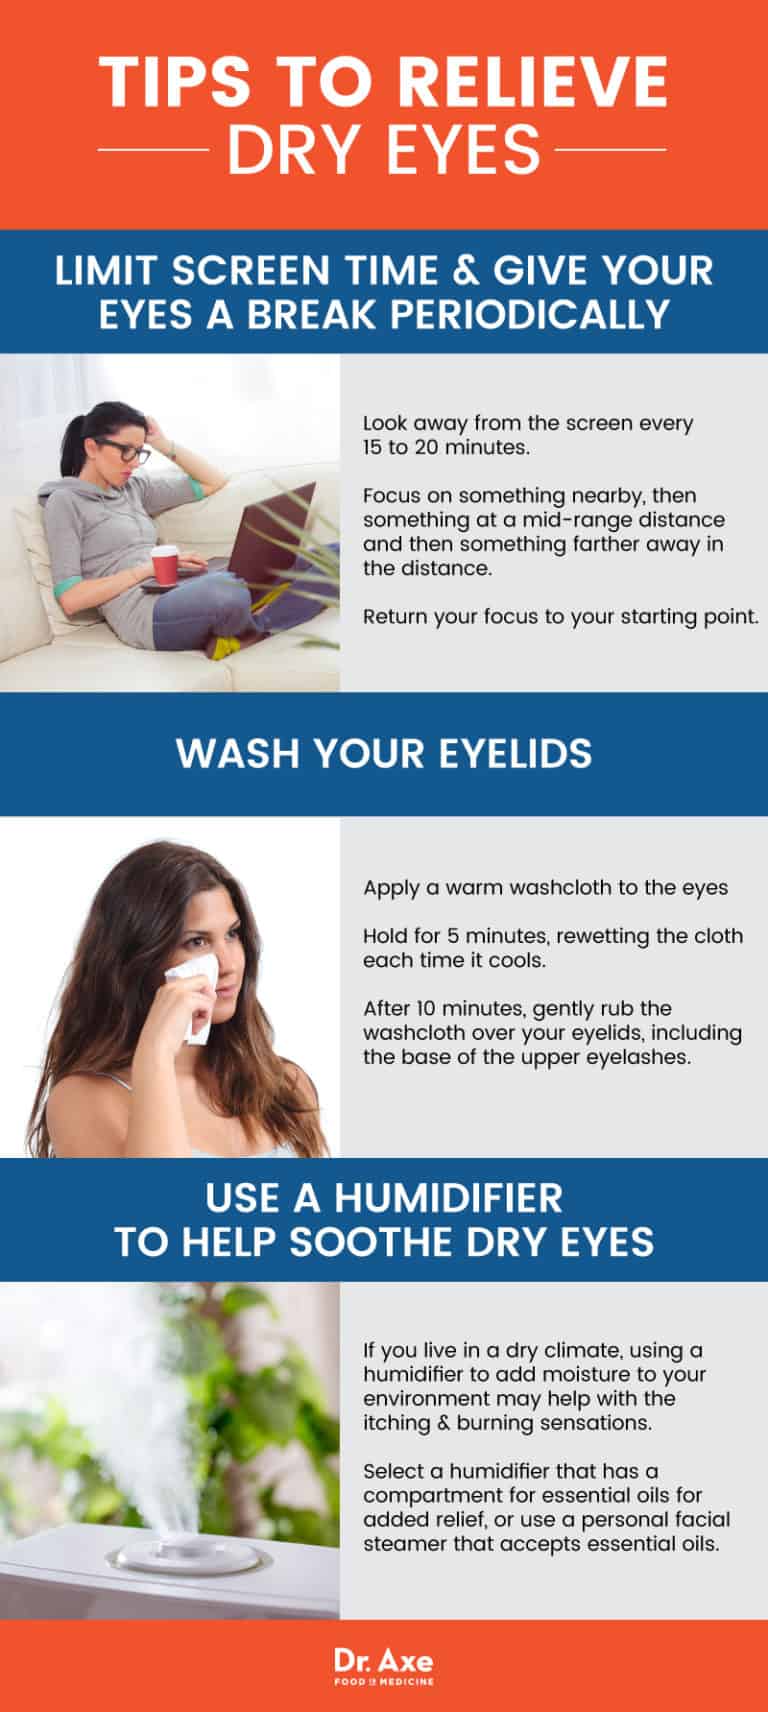 Dry Eye Syndrome: 9 Natural Ways to Relieve Dry Eyes - Dr. Axe